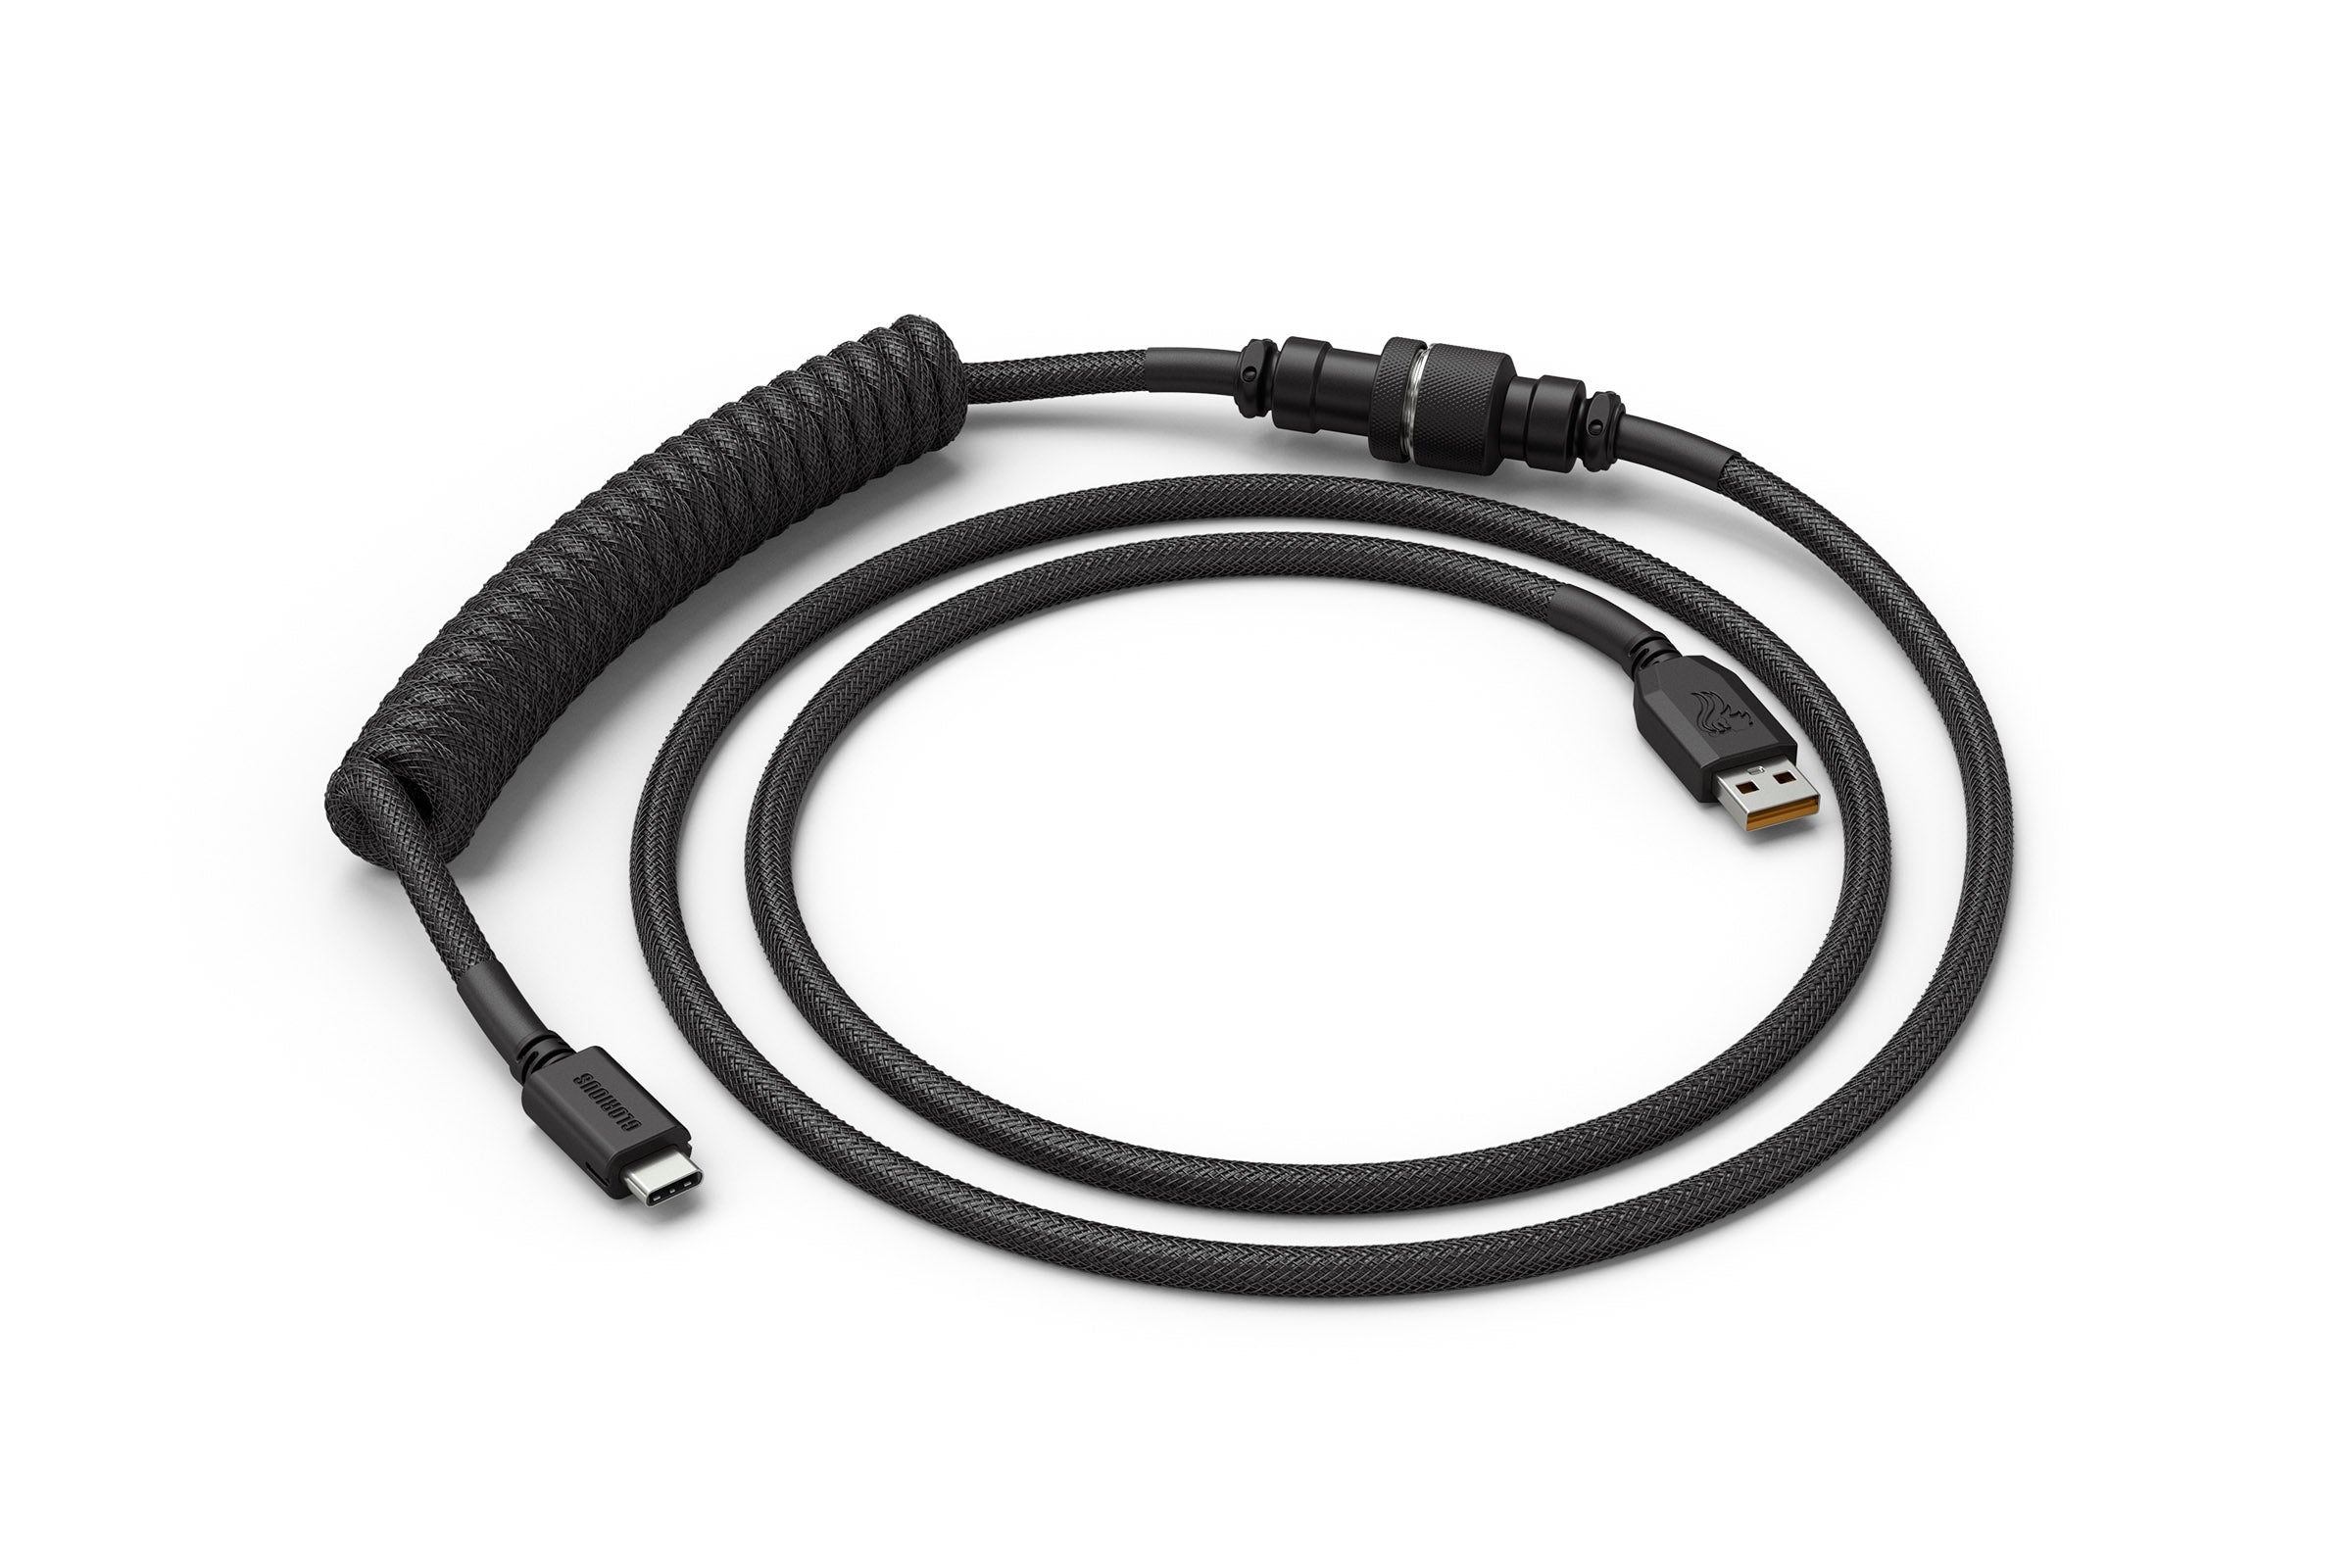 Glorious PC Coiled Keyboard Cable Black MKS9X20AL8 |27571|